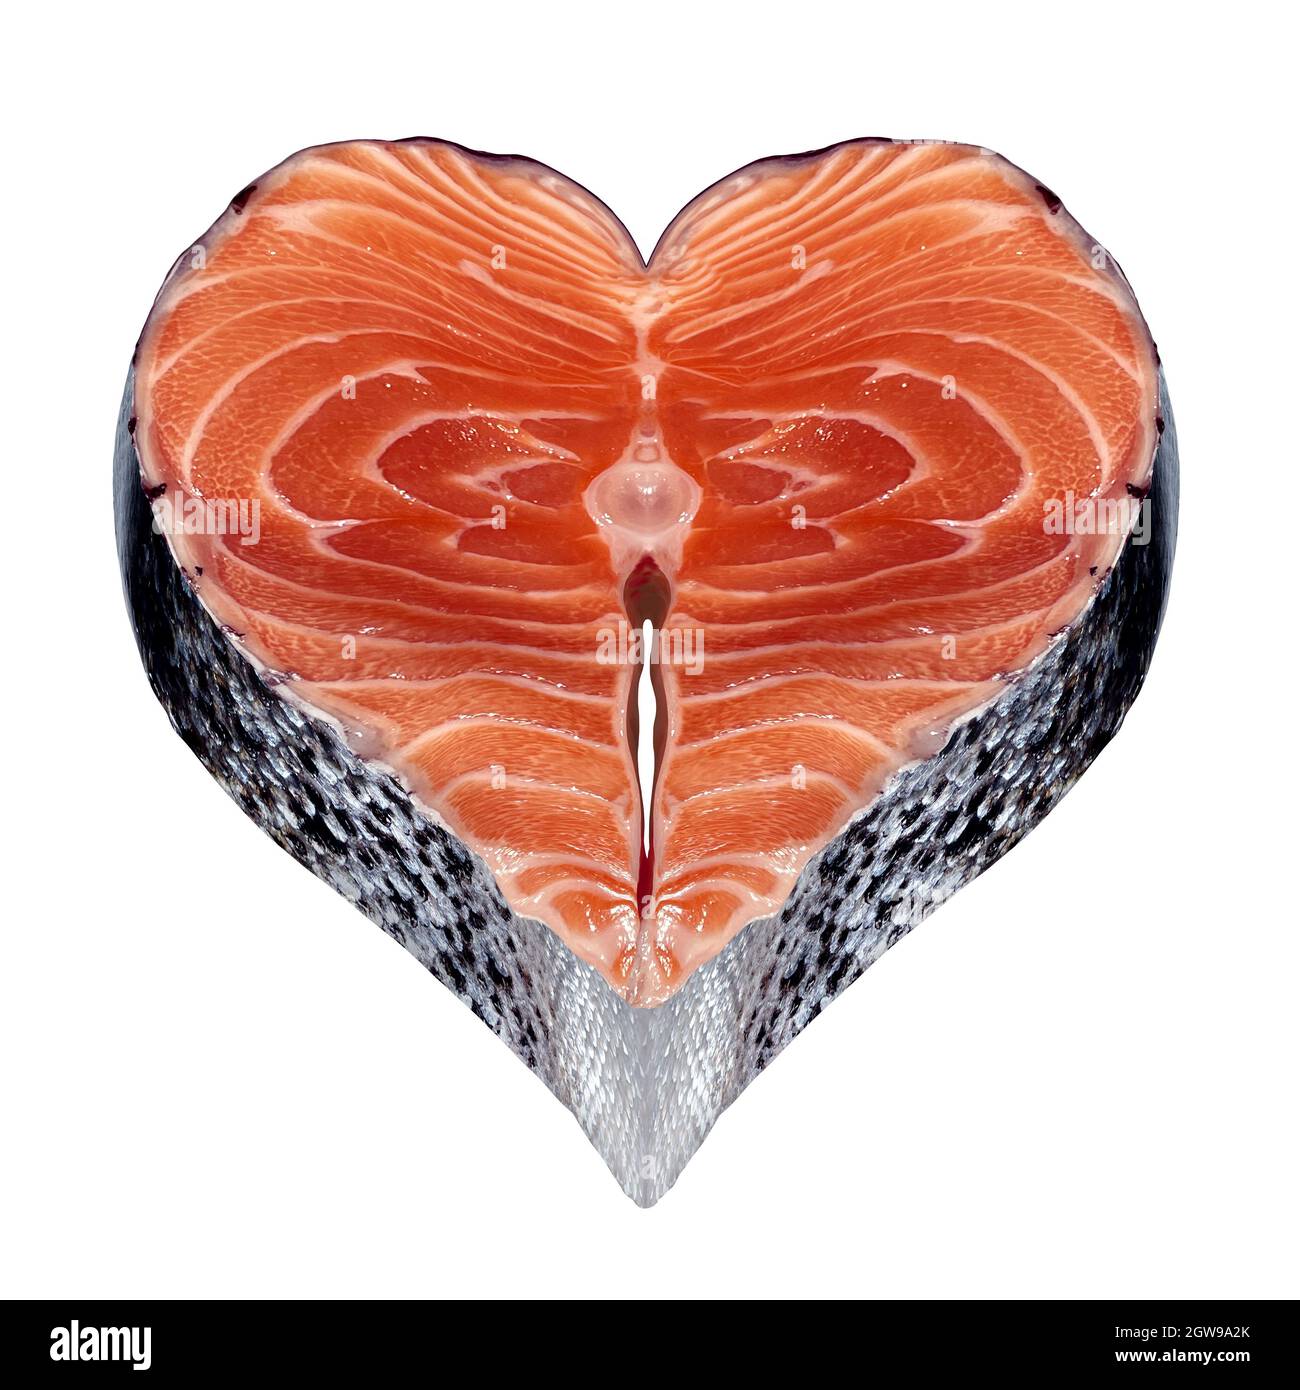 Healthy fish symbol as fresh seafood with a salmon steak in the shape of a heart as an icon of omega-3 healthy food source. Stock Photo